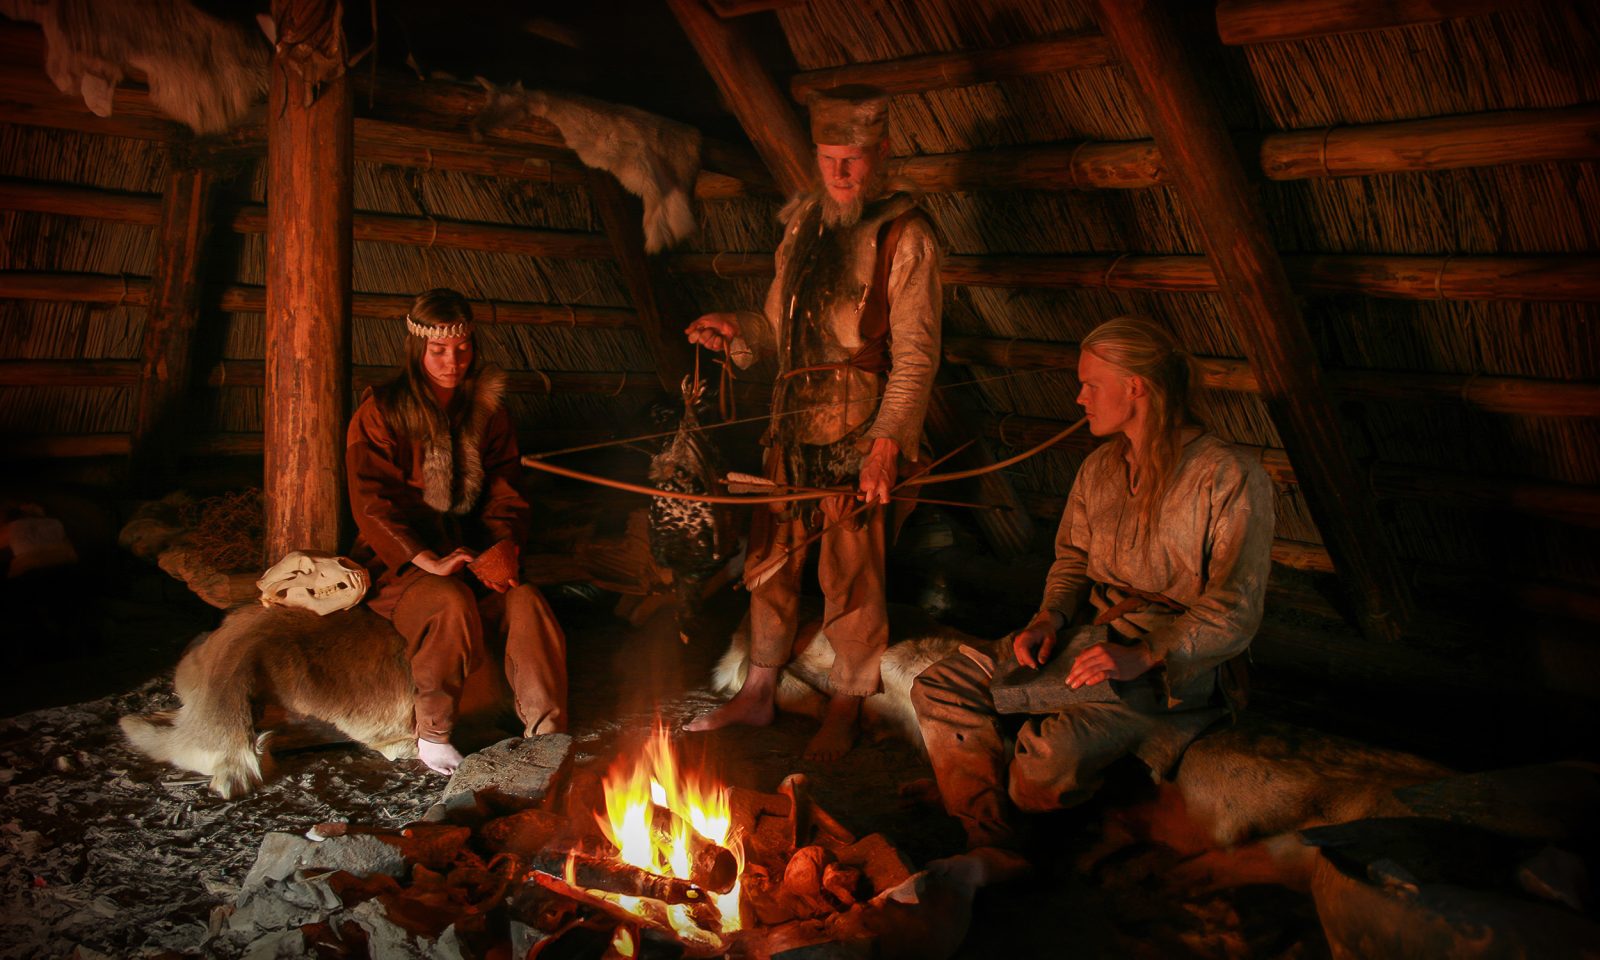 Guides in Stone Age clothing inside the restored dwelling by the campfire. Dim lighting.